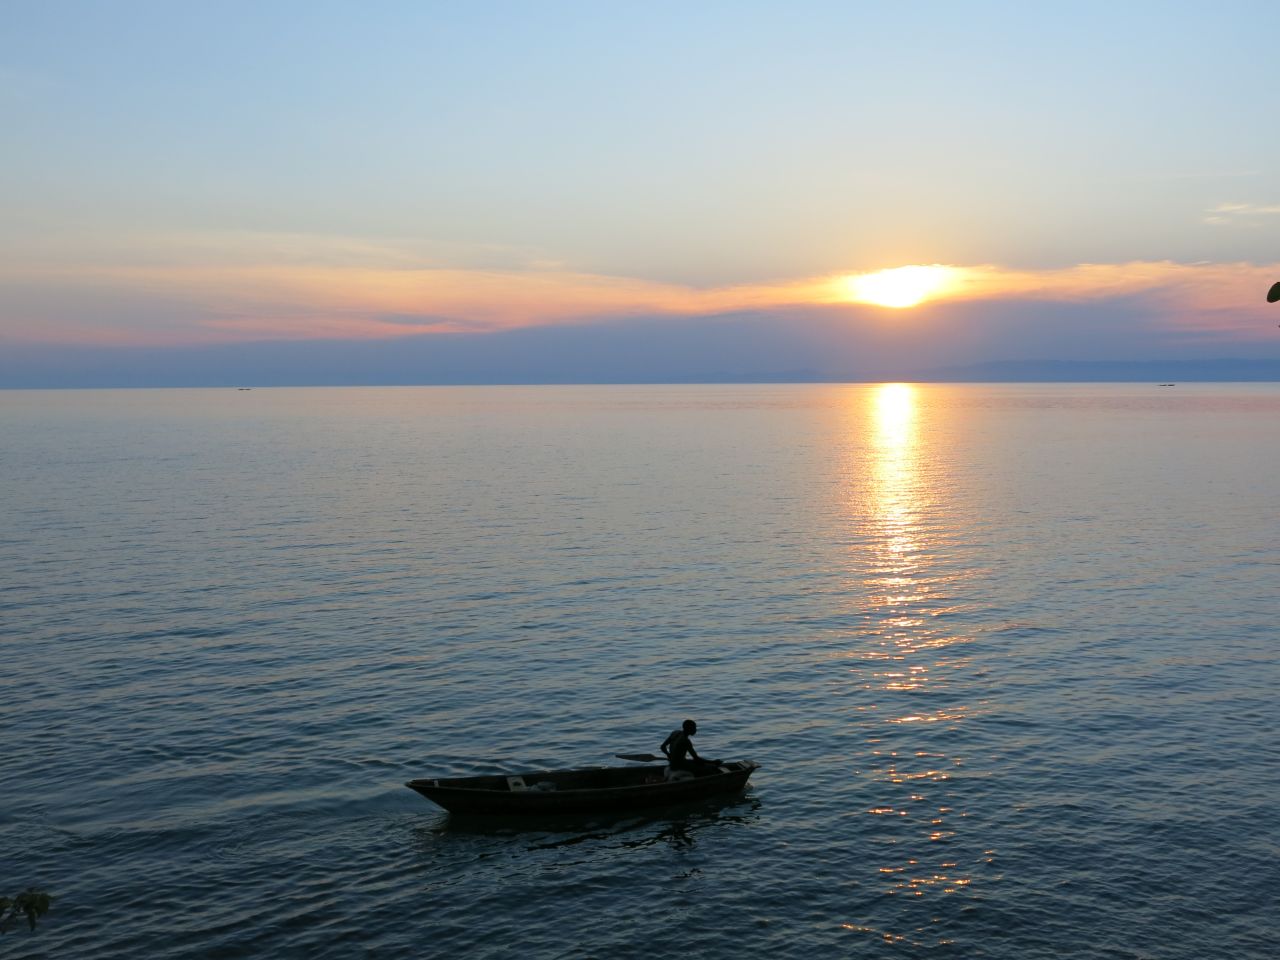 "I knew more of Asia and Europe than I did of Africa, so part of the motivation was to explore my own continent. Africa is the iconic continent of adventure." Pictured, sunset on Lake Tanganyika, Burundi. 